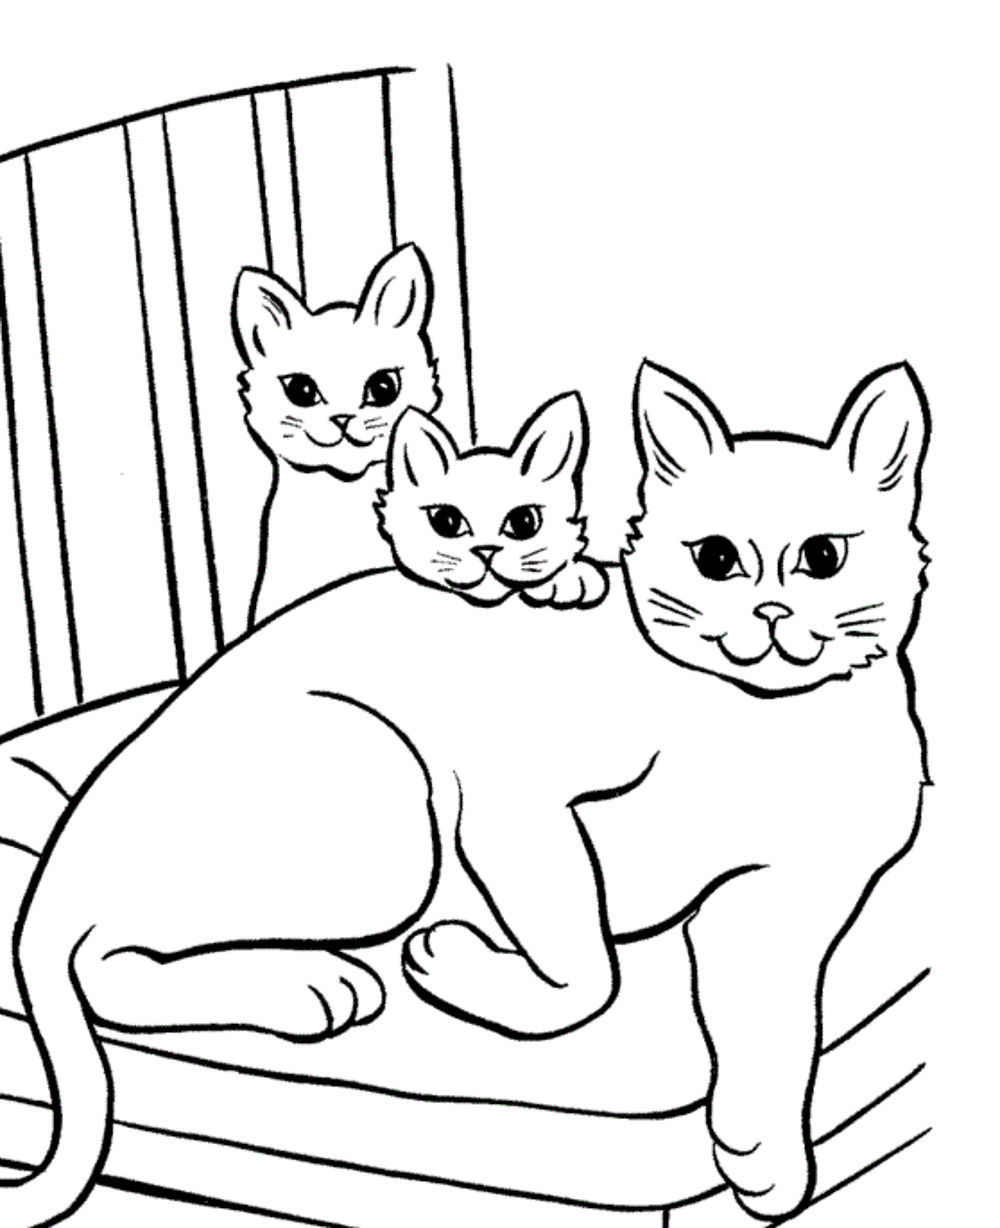 cat-printable-coloring-pages | | BestAppsForKids.com